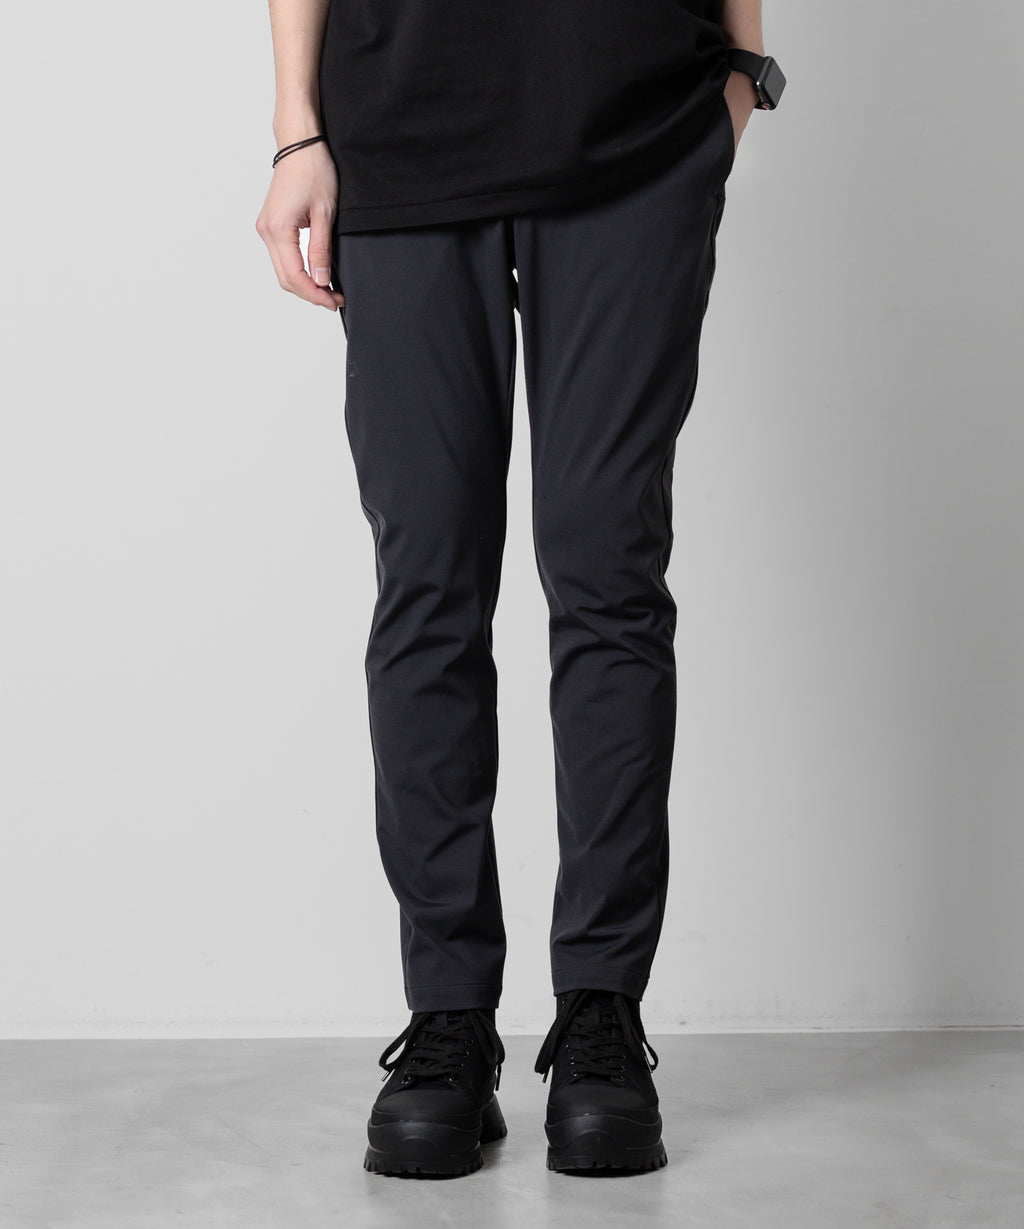 【ATTACHMENT】ATTACHMENT アタッチメントのNY/CO STRETCH JERSEY NARROW TROUSERS - D.GRAY 公式通販サイトsession福岡セレクトショップ